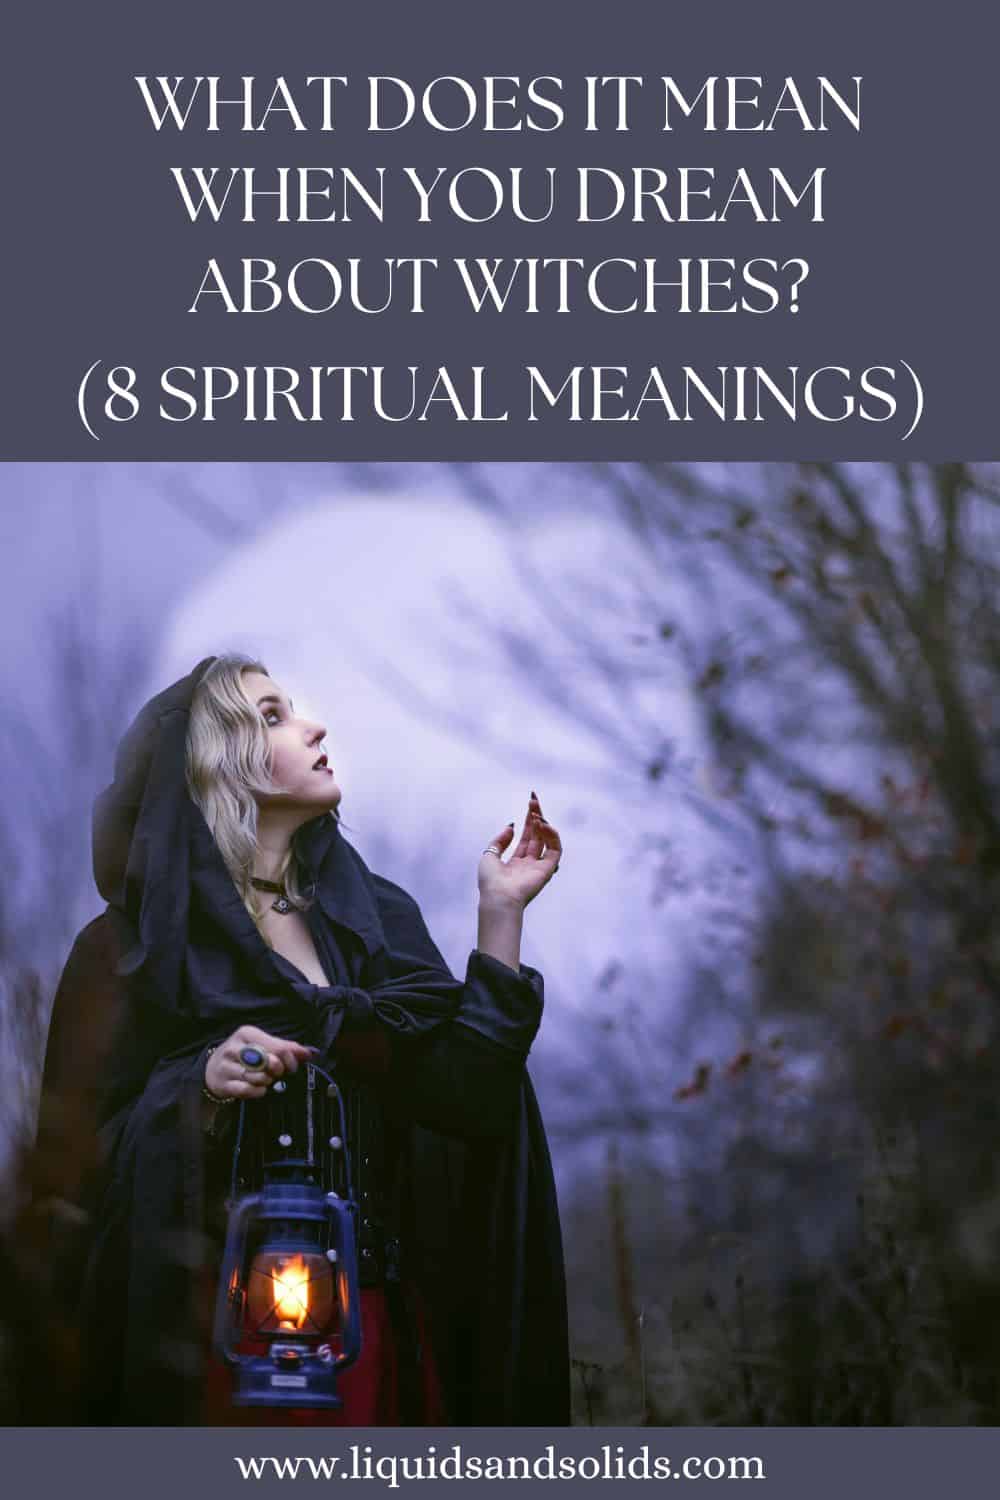 What Does It Mean When You Dream About Witches? (8 Spiritual Meanings)